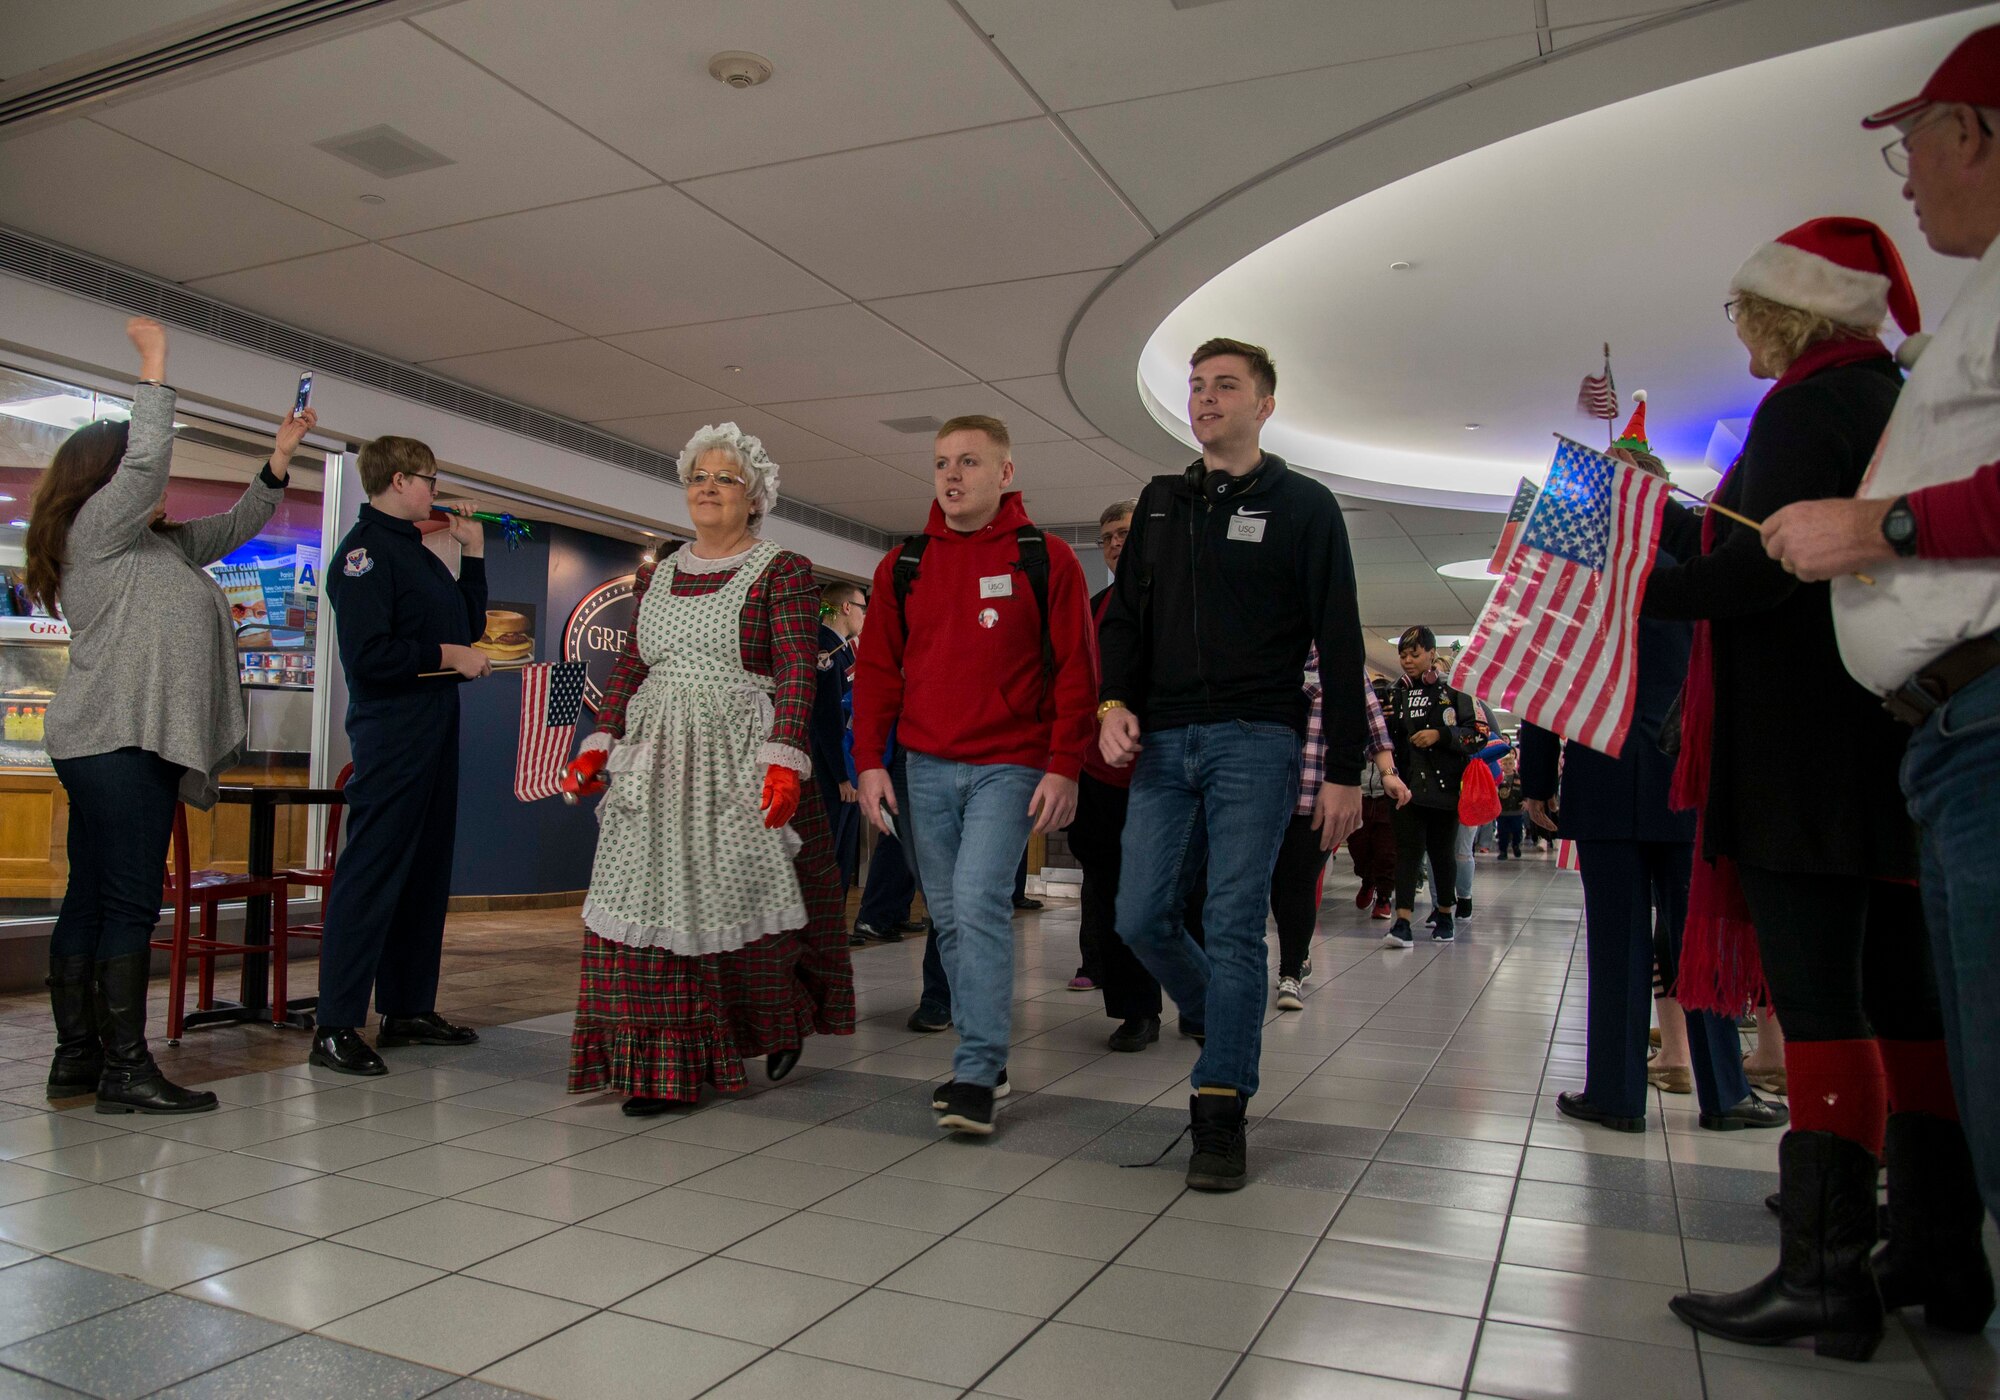 Gold Star families are cheered on as they enter the St. Louis-Lambert airport Dec. 8, 2018 in St. Louis, Missouri. Families from all over the country were flown to Disney World in Orlando, Florida, as part of the Snow Ball Express, a four-day trip sponsored by the Gary Sinise Foundation and American Airlines to honor Gold Star families.